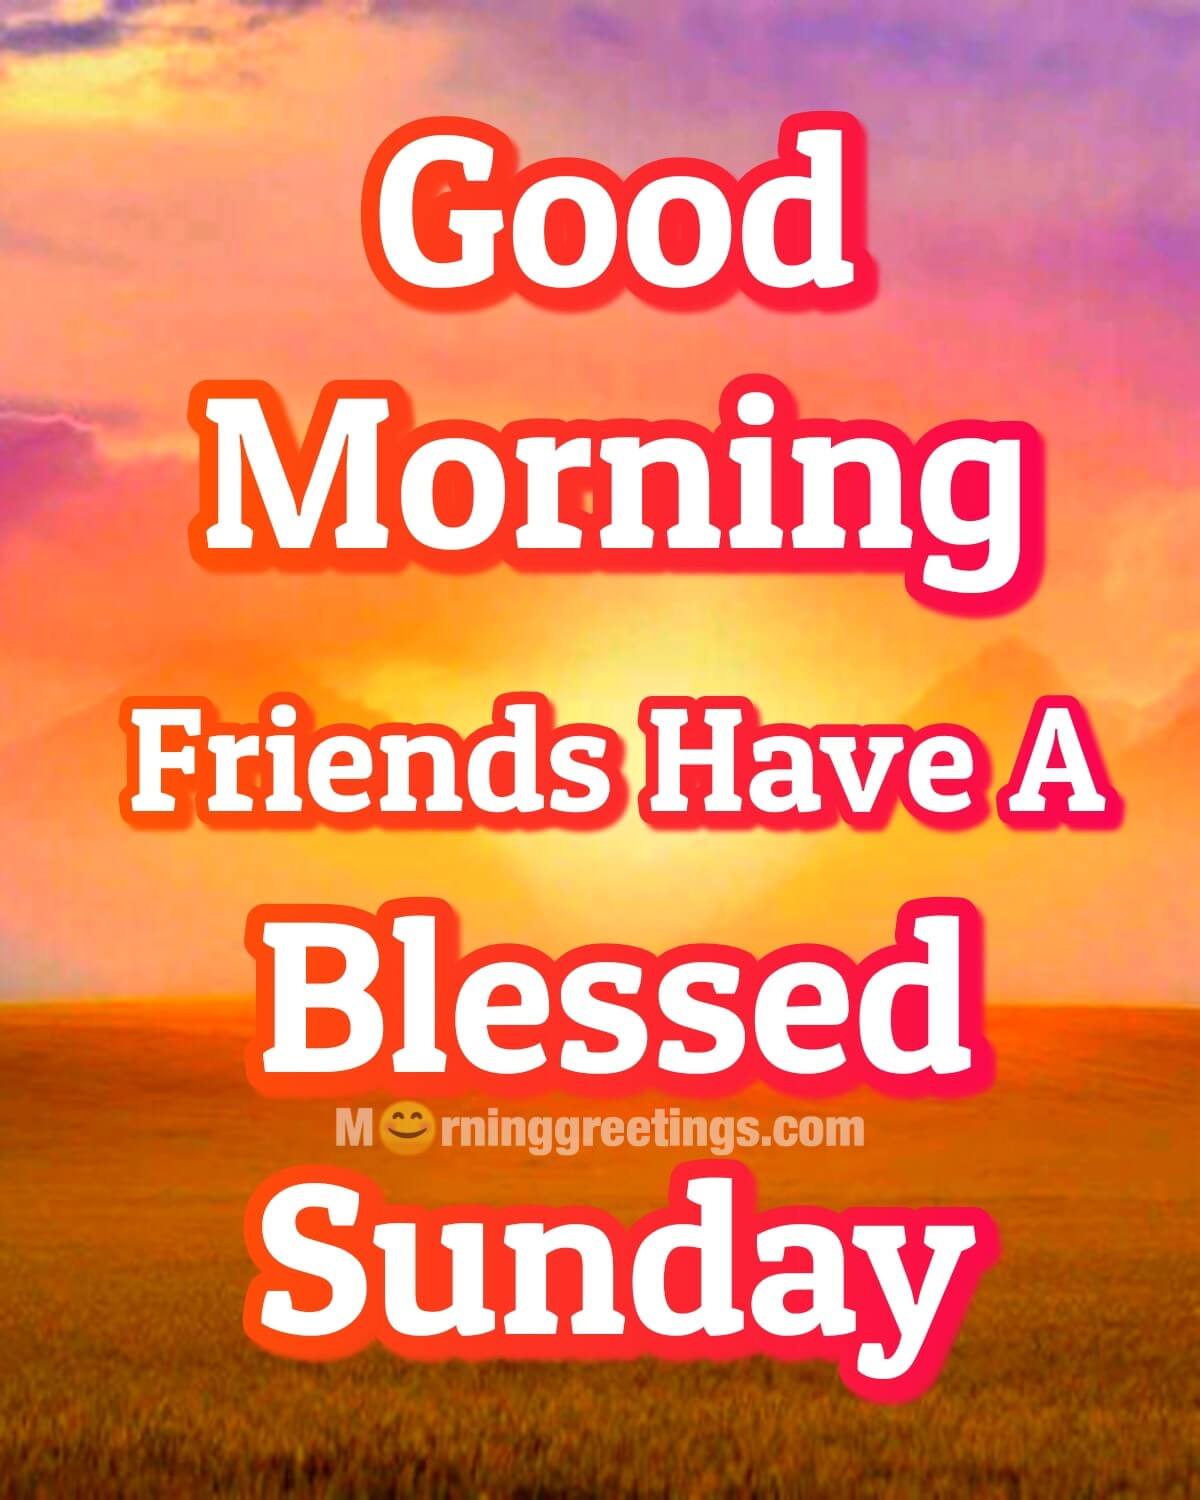 Good Morning Friends Have A Blessed Sunday